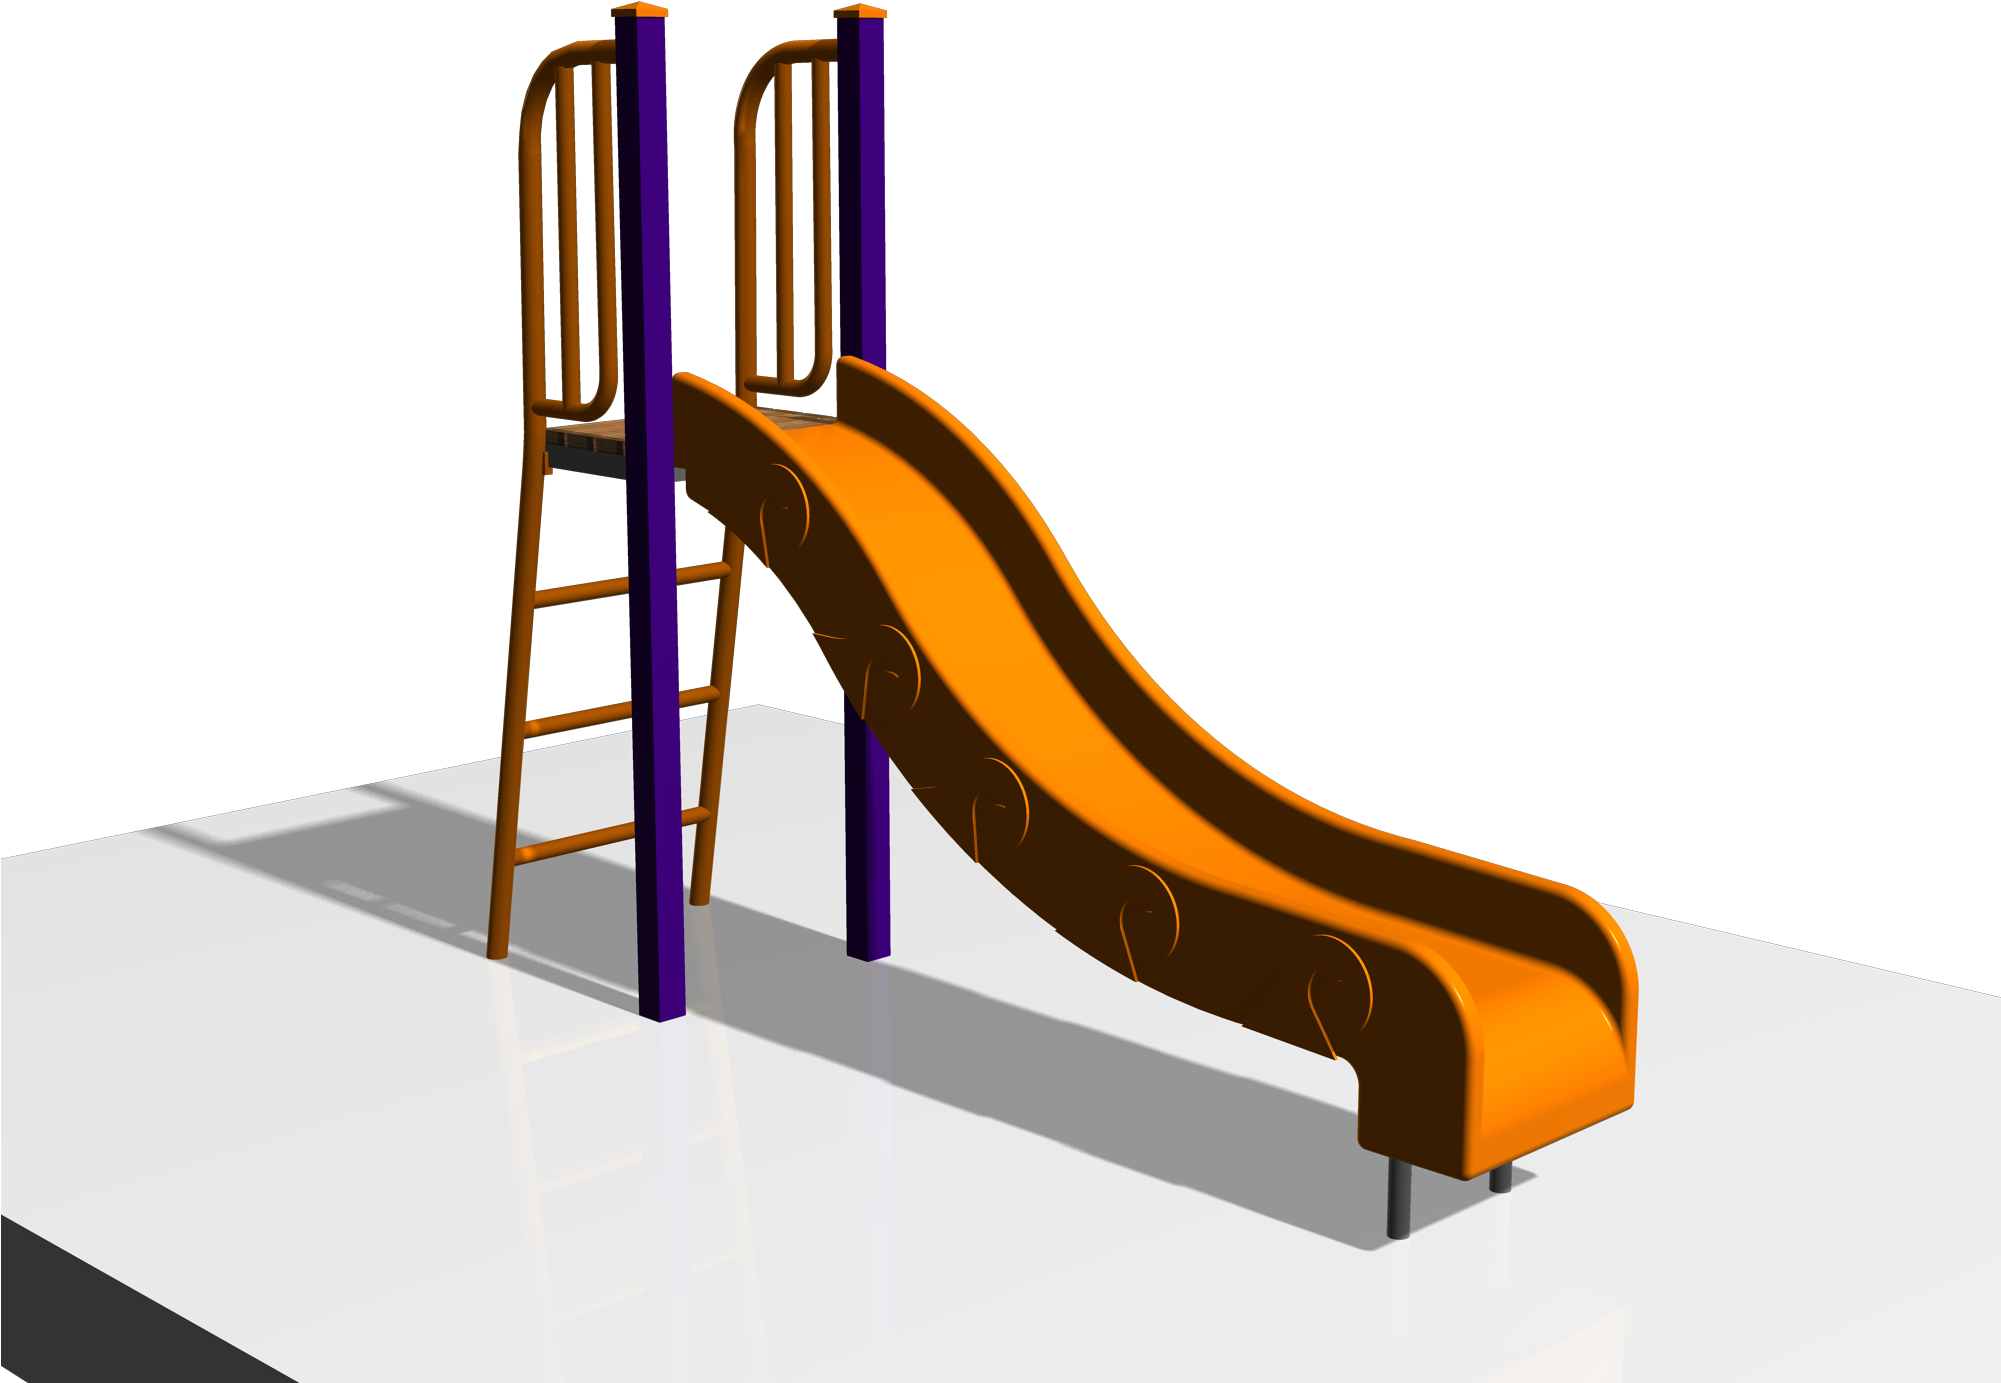 A Slide With Purple And Orange Poles